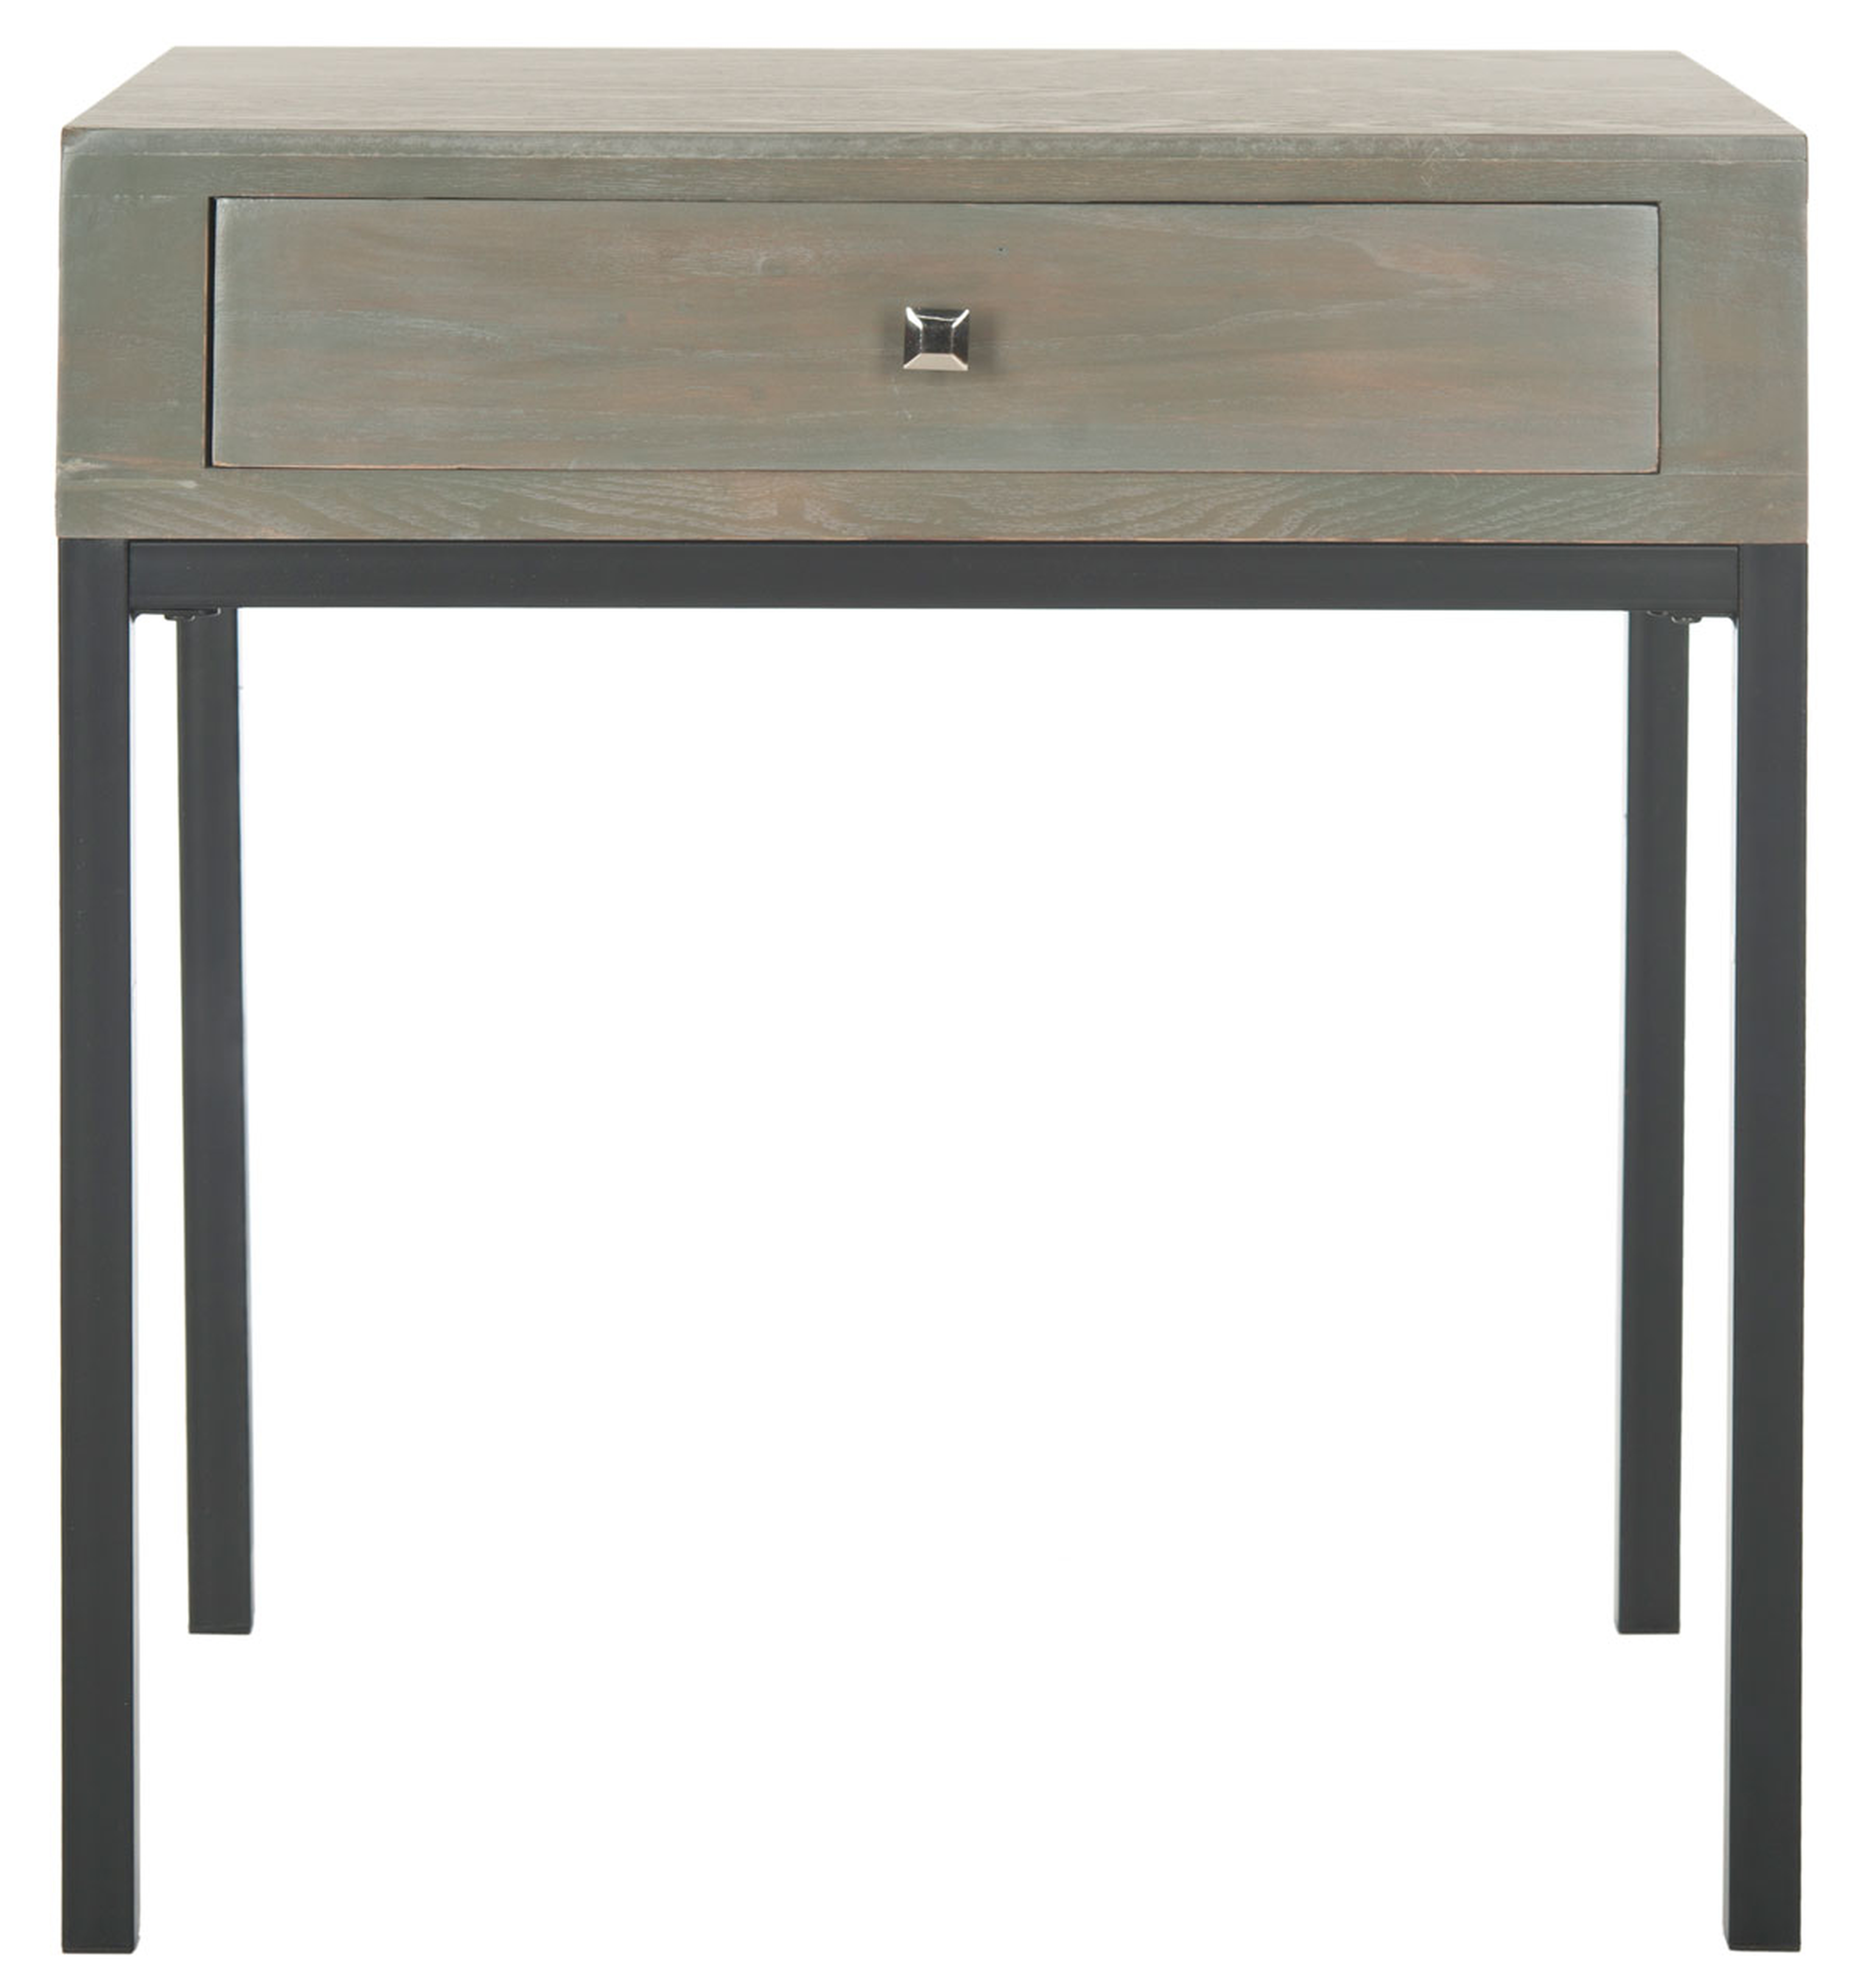 Adena End Table With Storage Drawer - French Grey - Arlo Home - Arlo Home